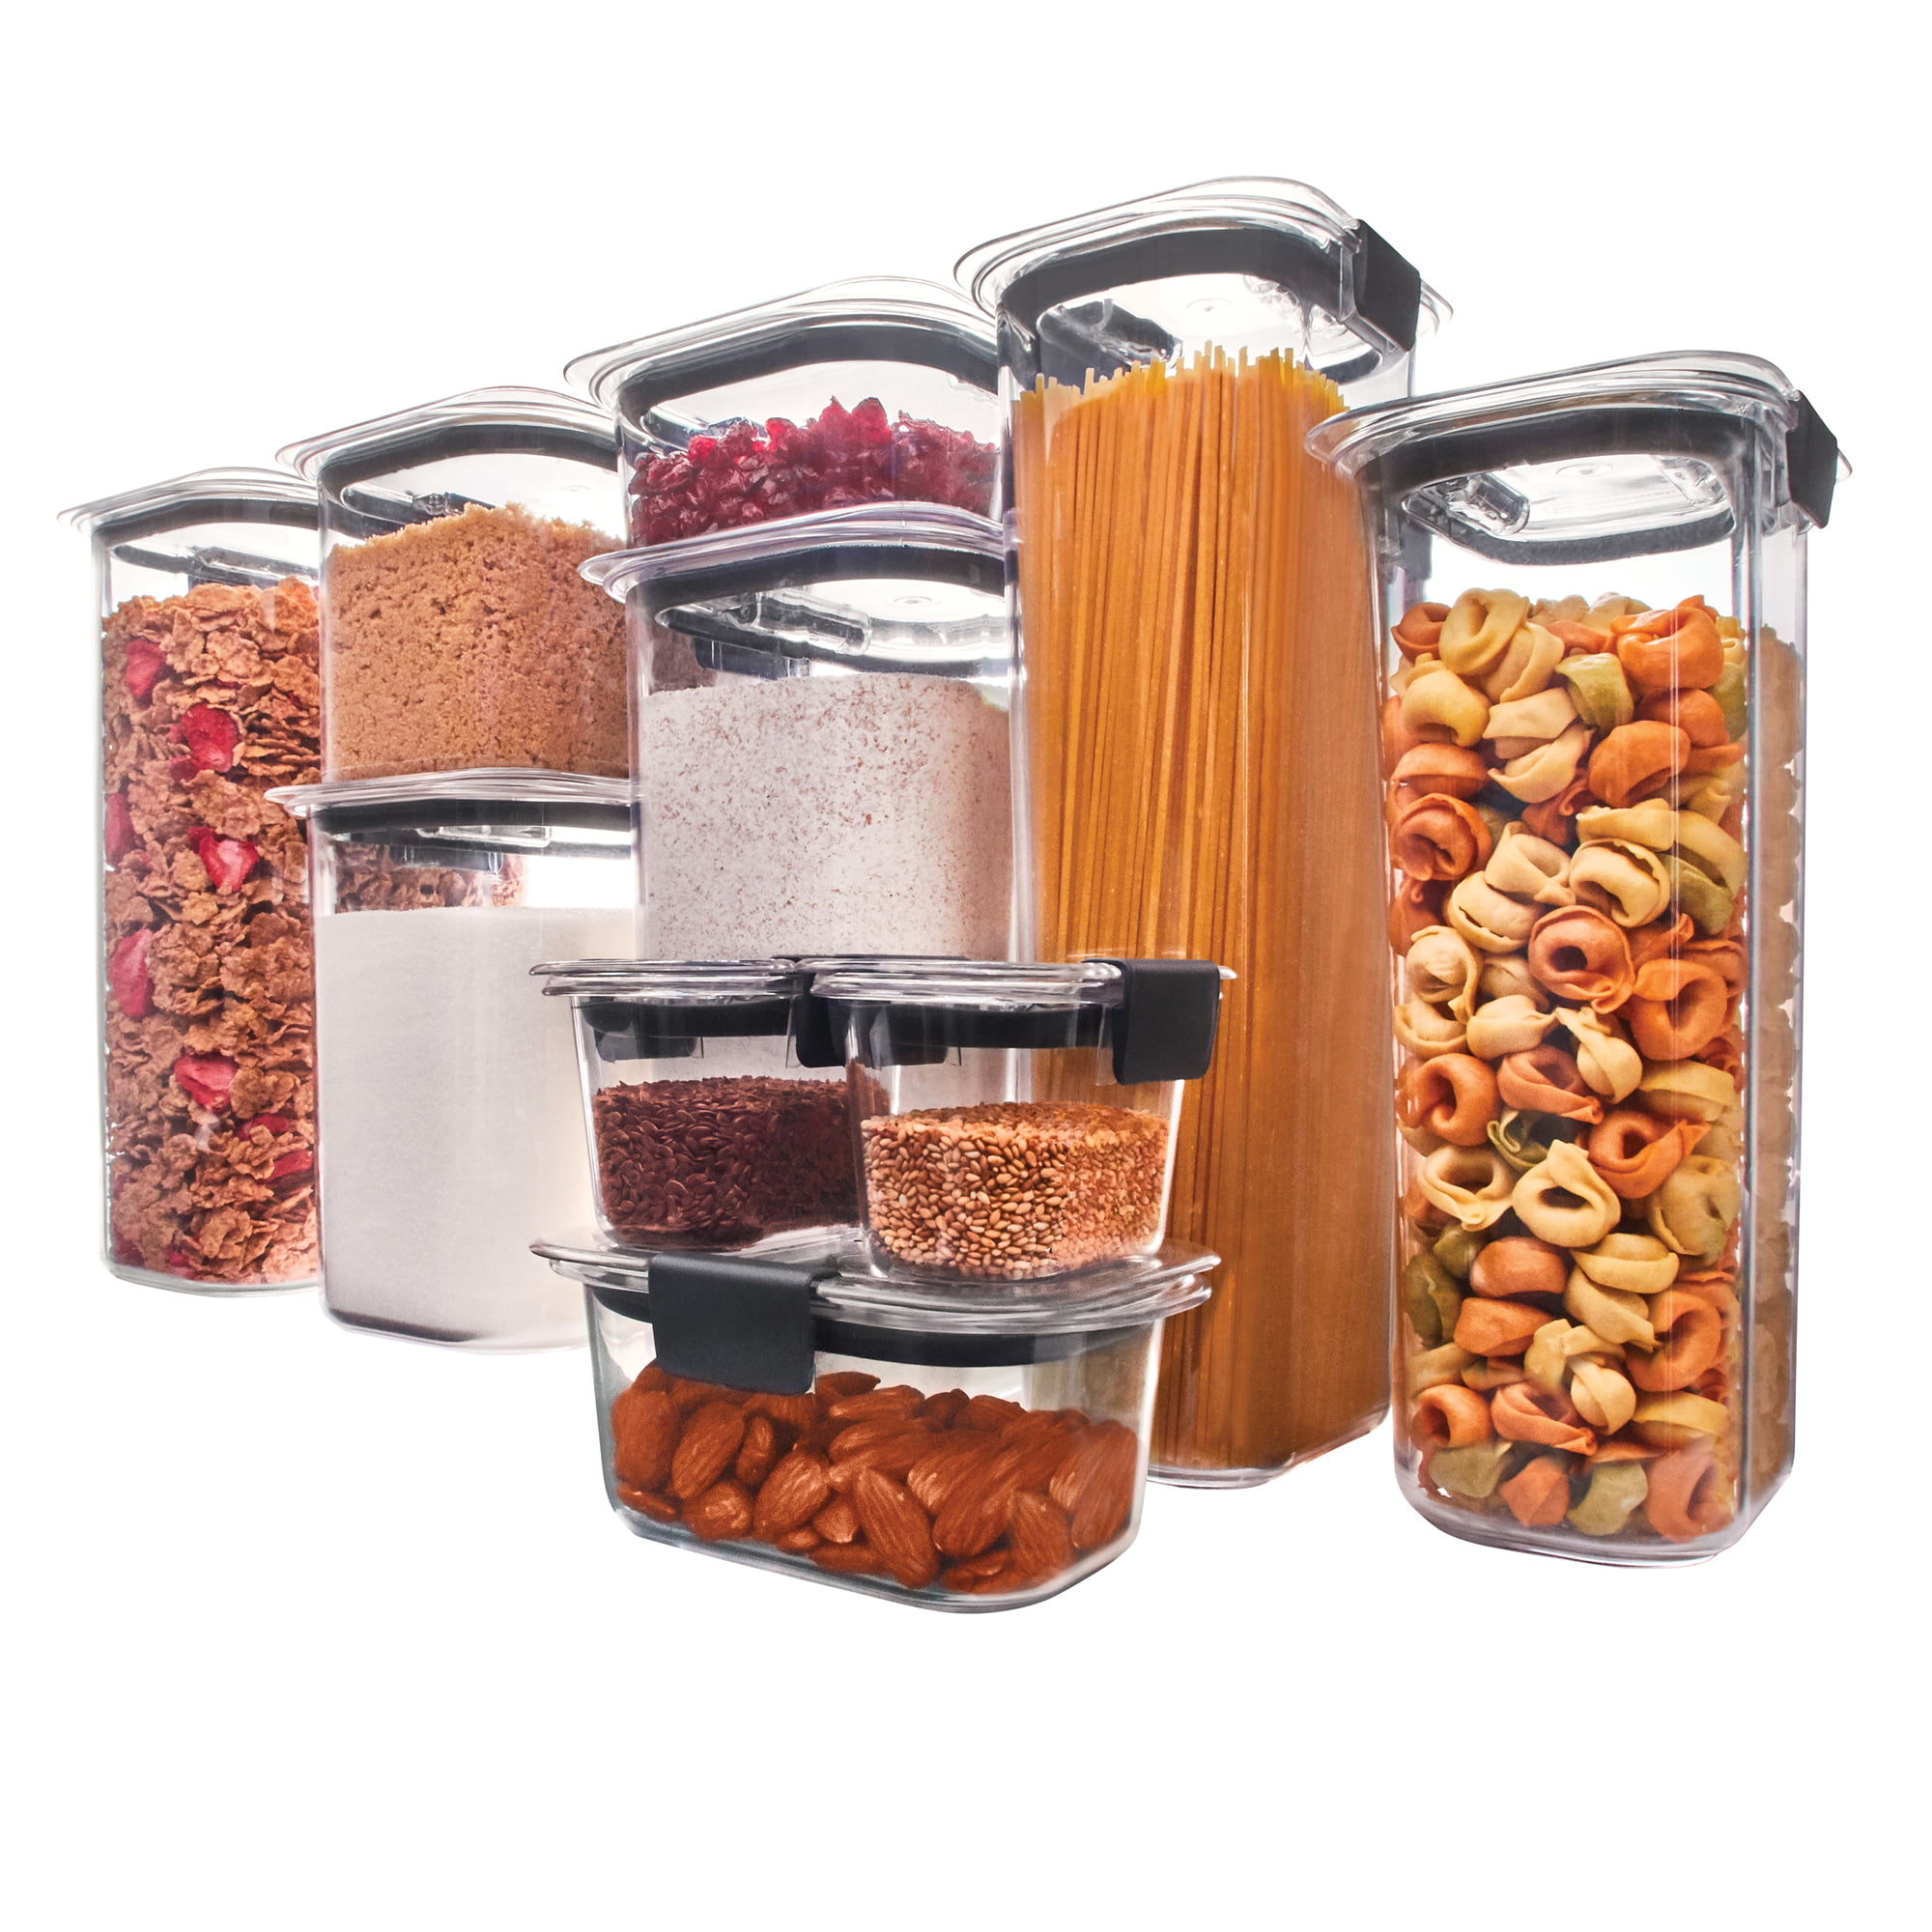 Unique Kitchen Pantry Storage Containers Walmart for Small Space